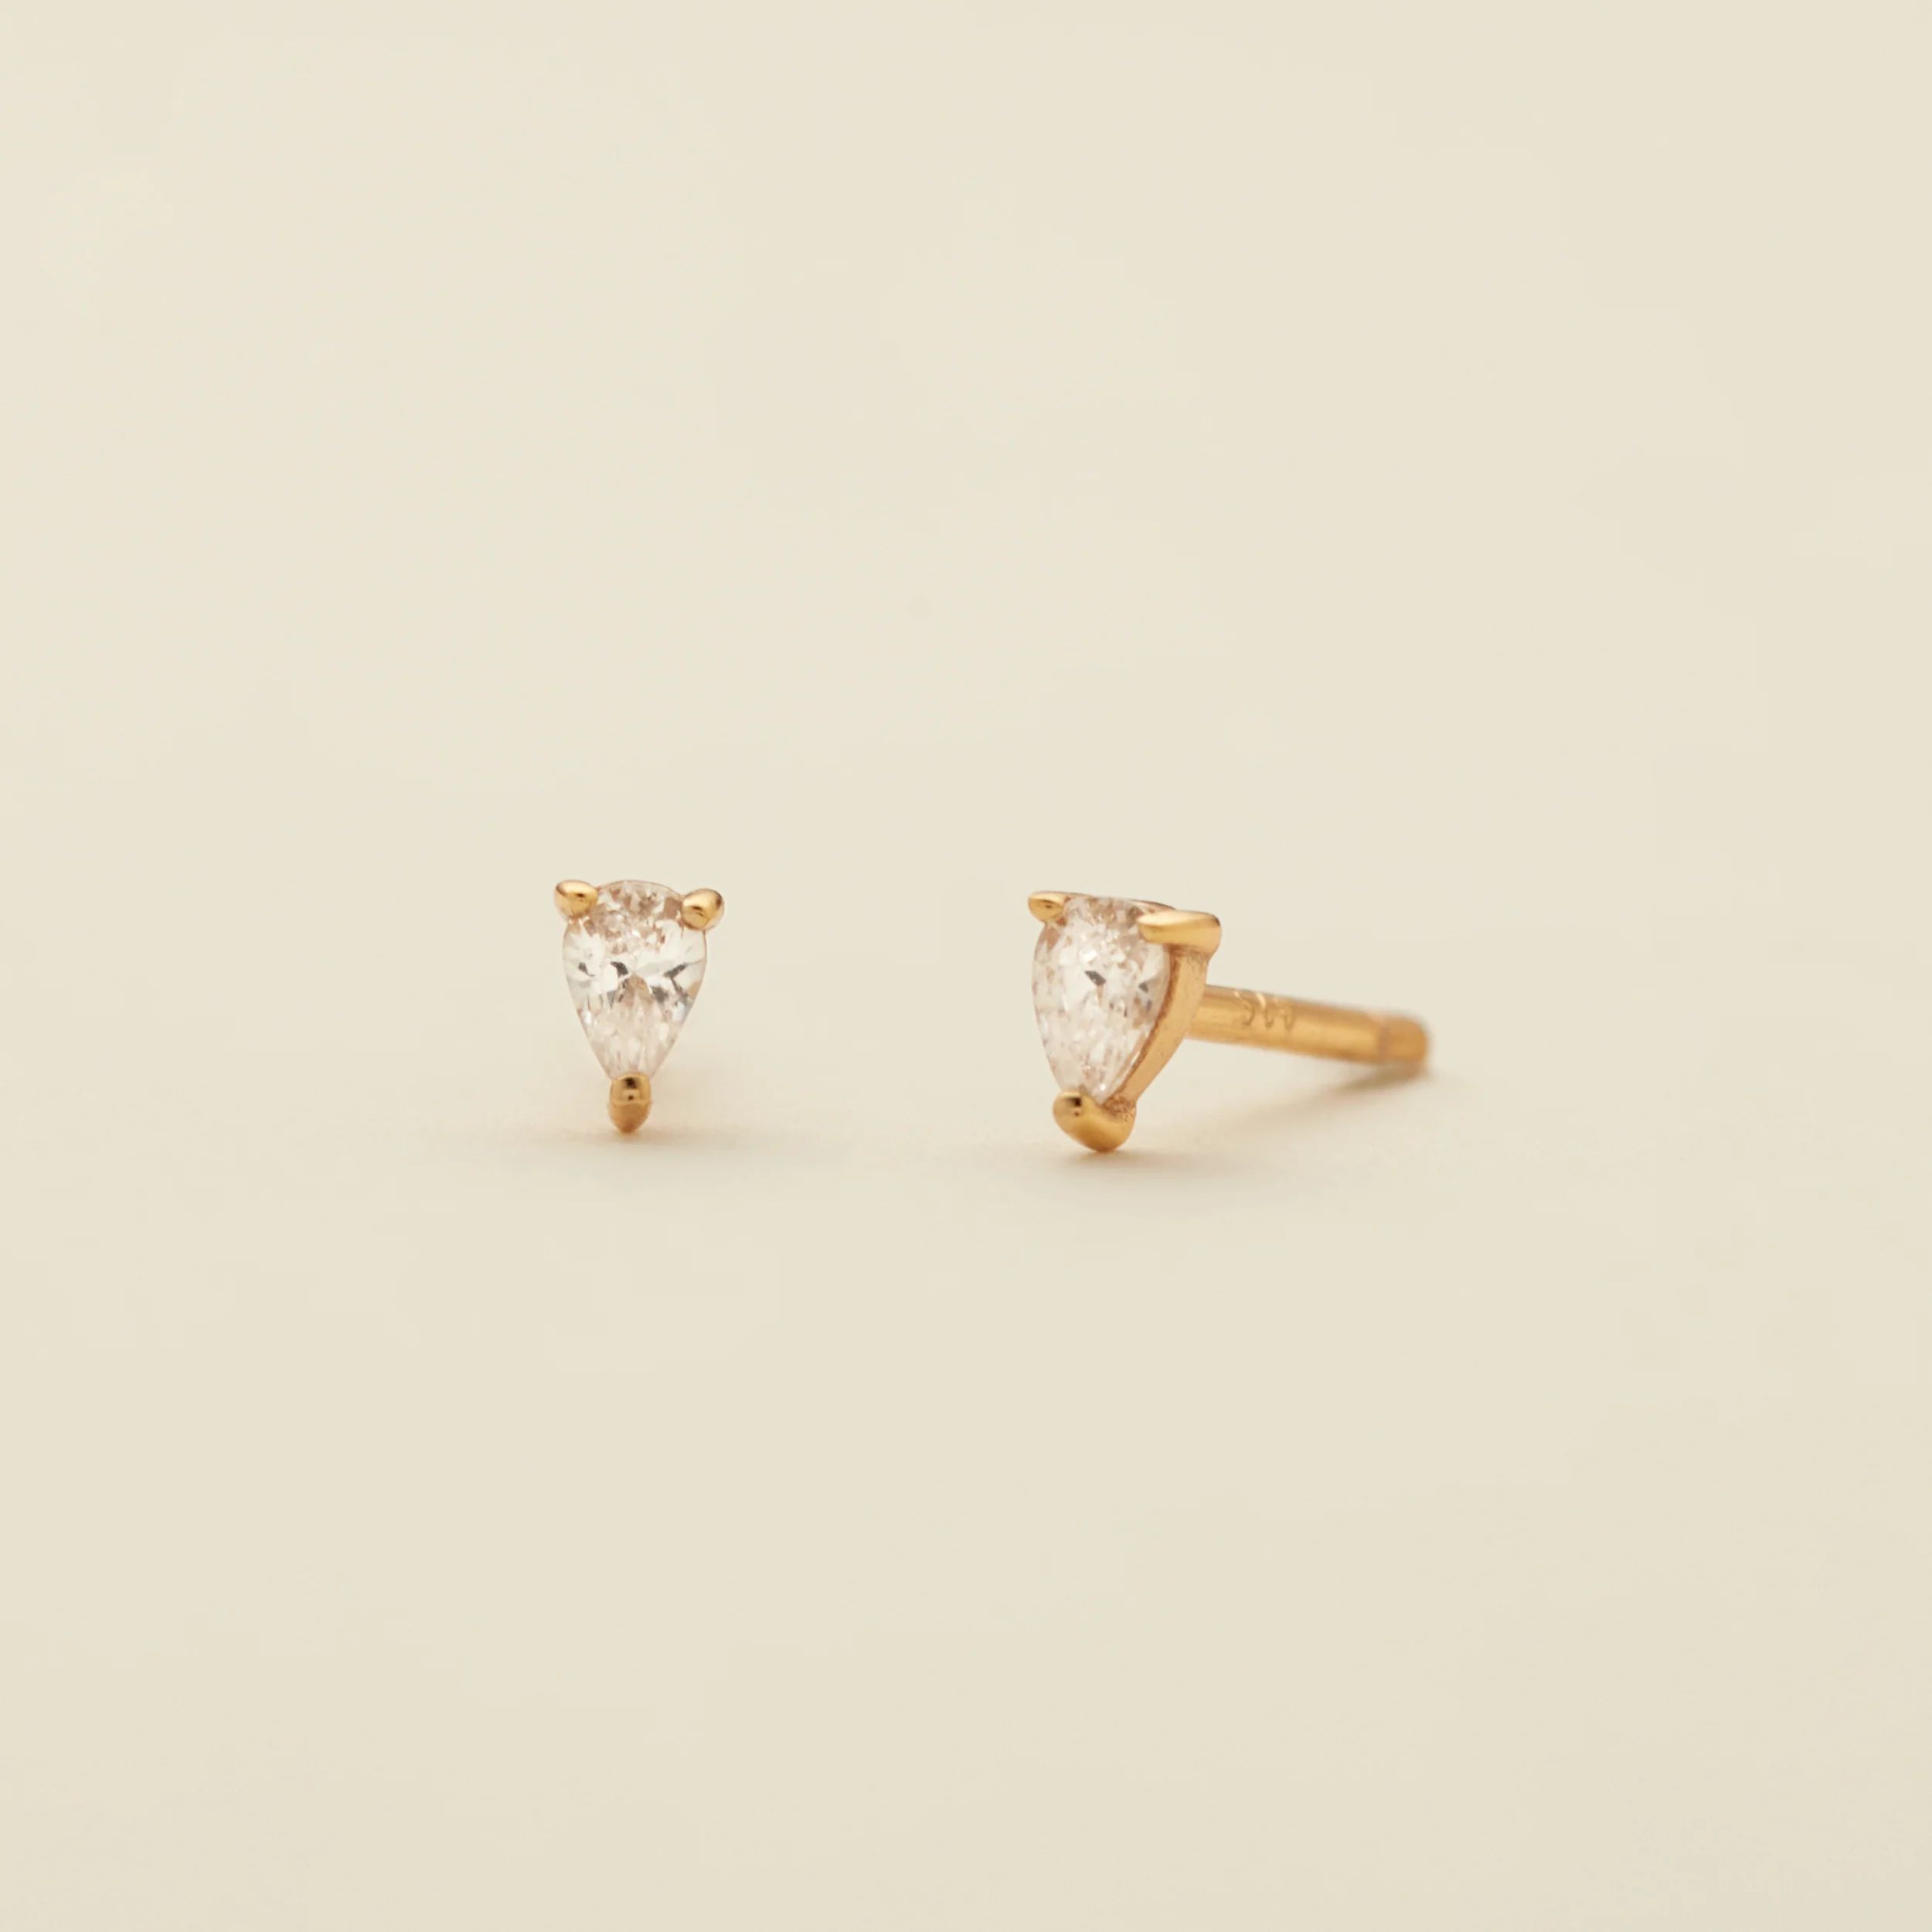 Luxe Pear Shaped Stud Earrings | Made by Mary (US)